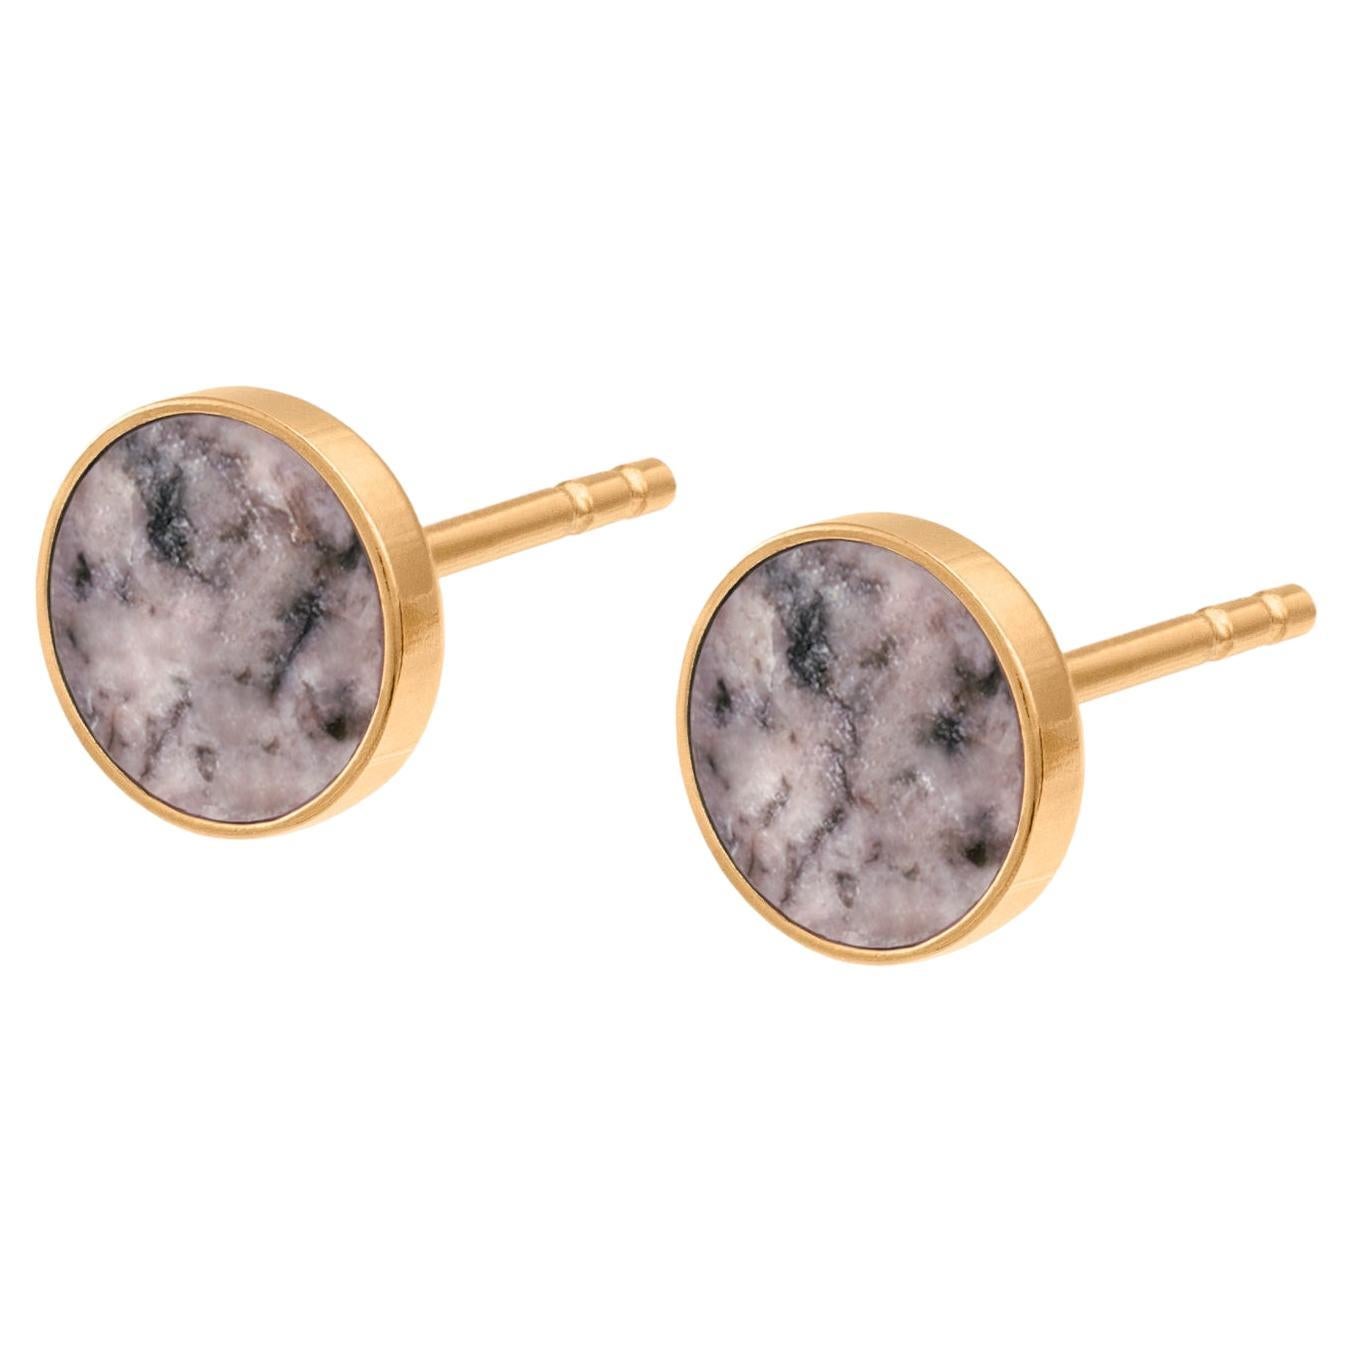 Small earrings studs with pink stone rodingite gold For Sale